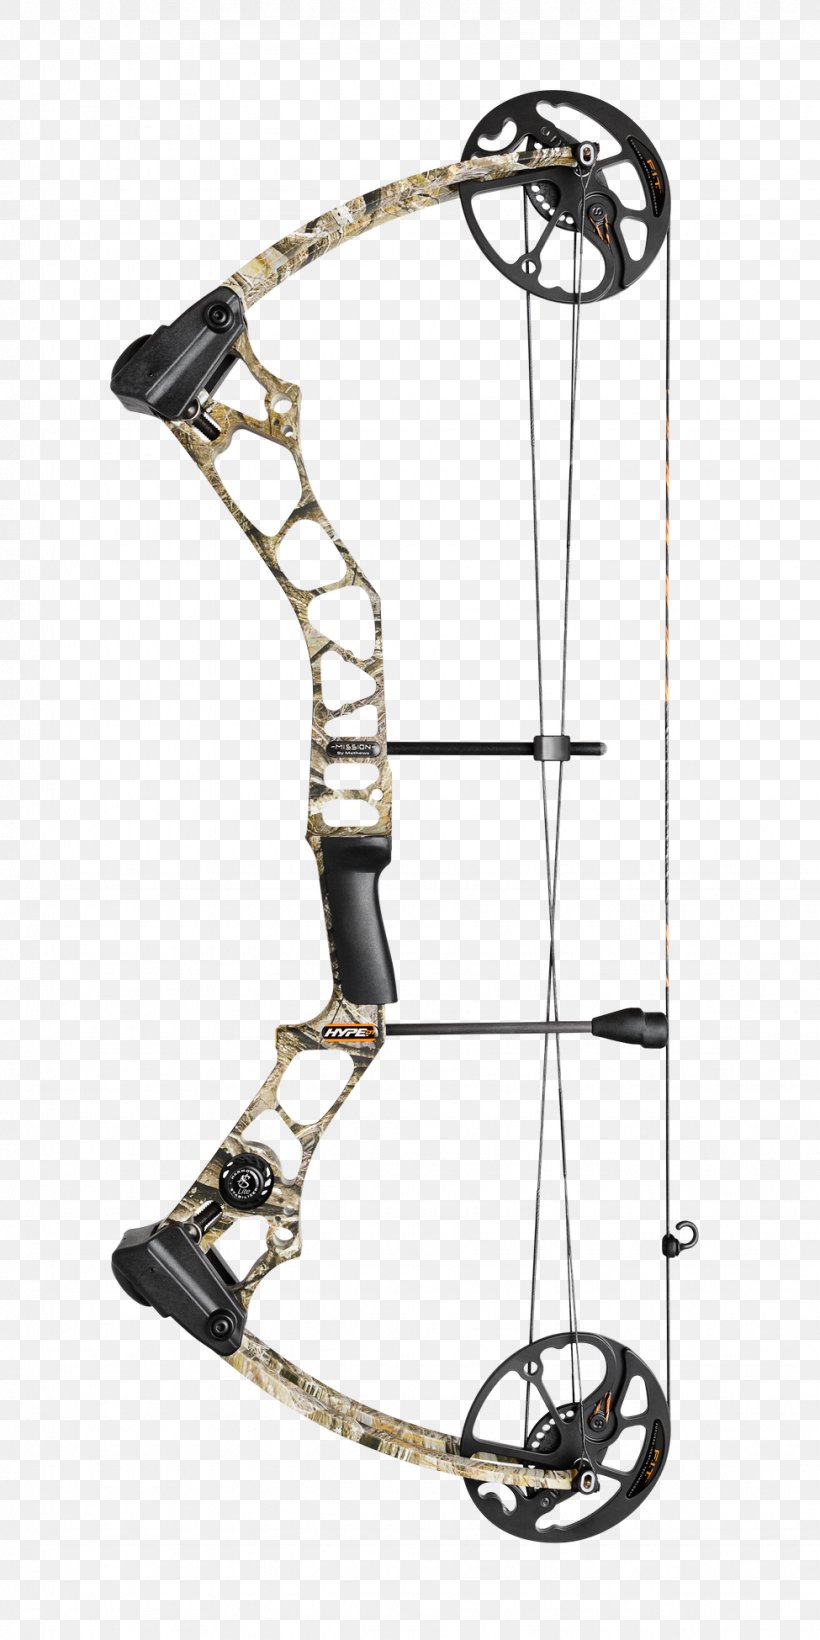 Compound Bows Archery Bow And Arrow Bowhunting, PNG, 975x1950px, Compound Bows, Advanced Archery, Archery, Arrowhead, Bow Download Free